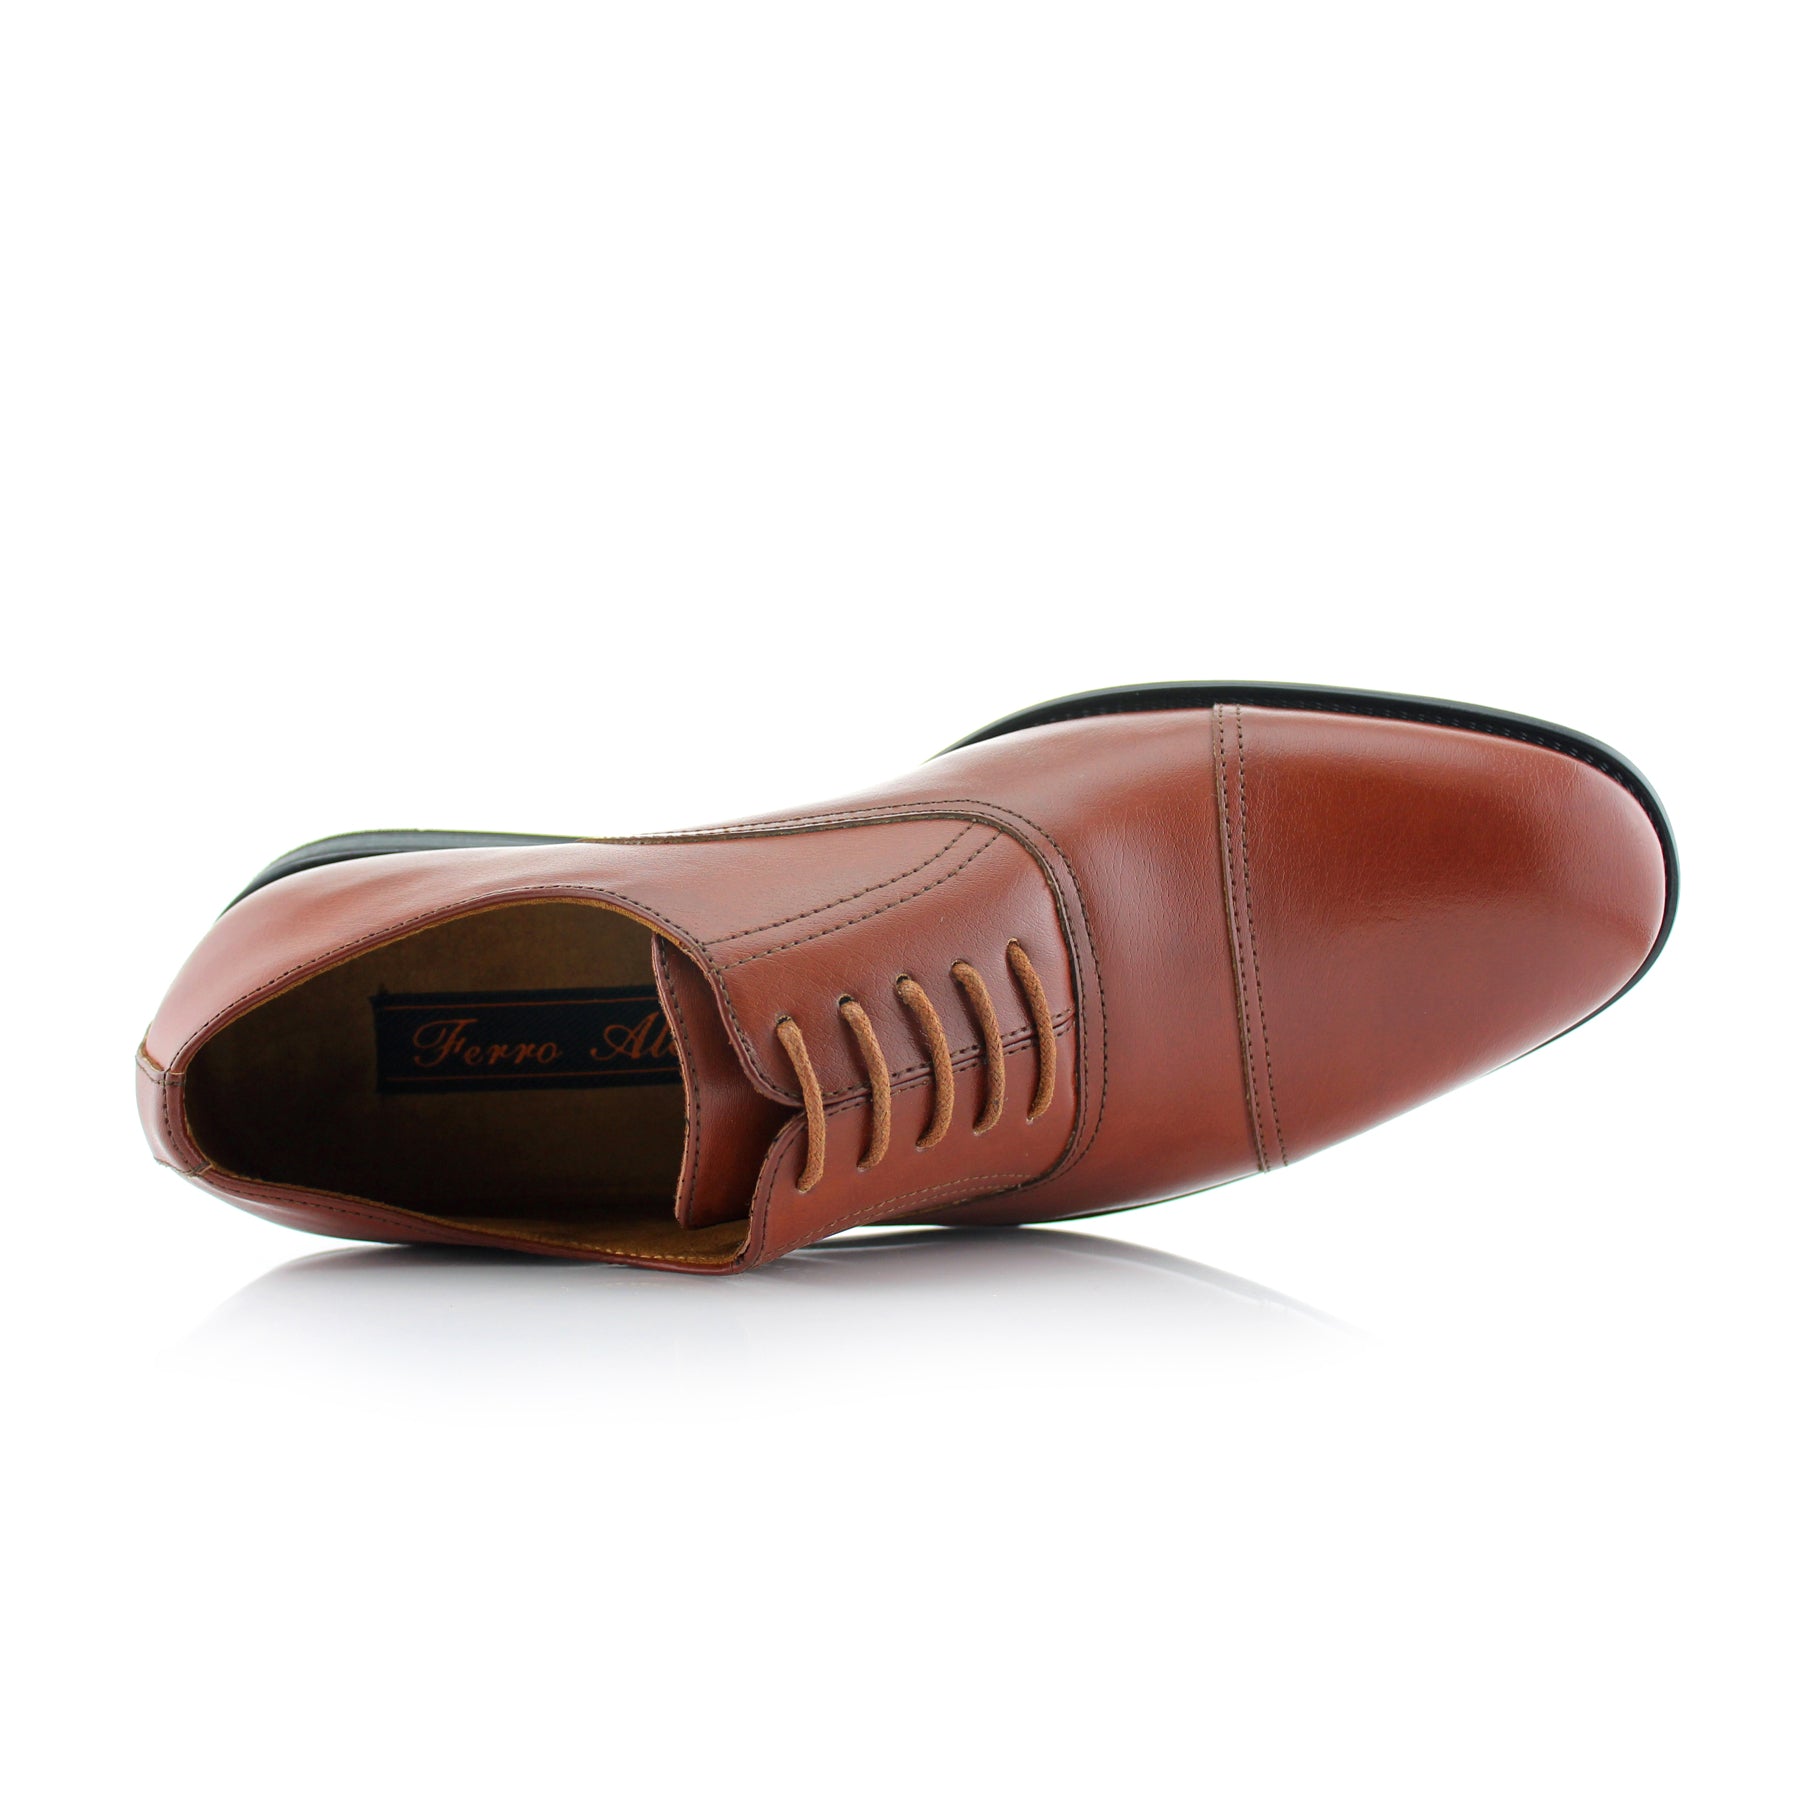 Classic Cap-Toe Oxford Dress Shoes | Charles by Ferro Aldo | Conal Footwear | Top-Down Angle View